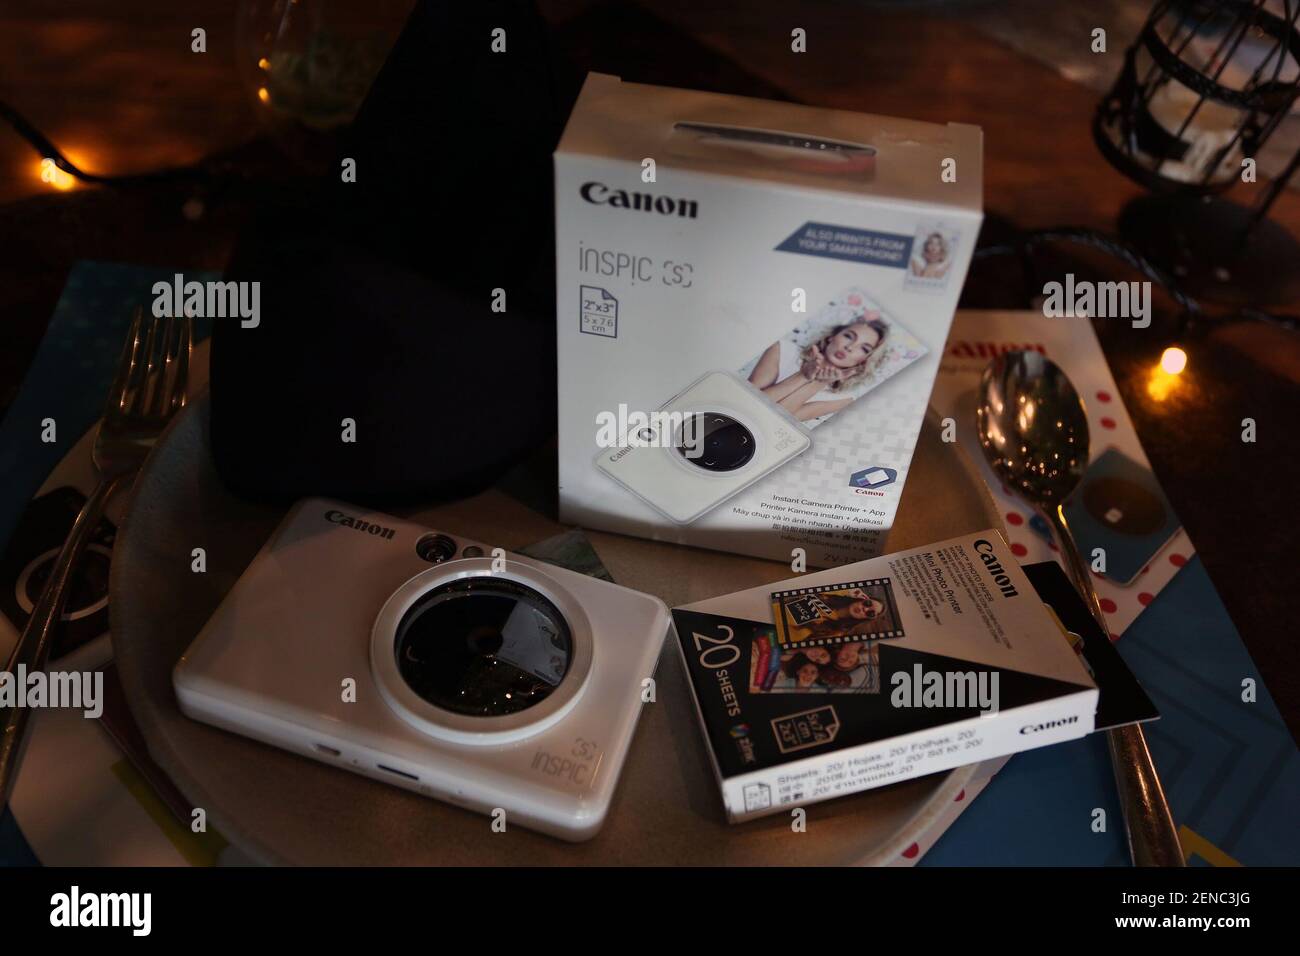 A Canon camera on the table during the launch of the Canon iNSPiC instant  printer camera in Jakarta, on July 24, 2019. Canon through Datascrip  launched the iNSPiC instant printer camera with